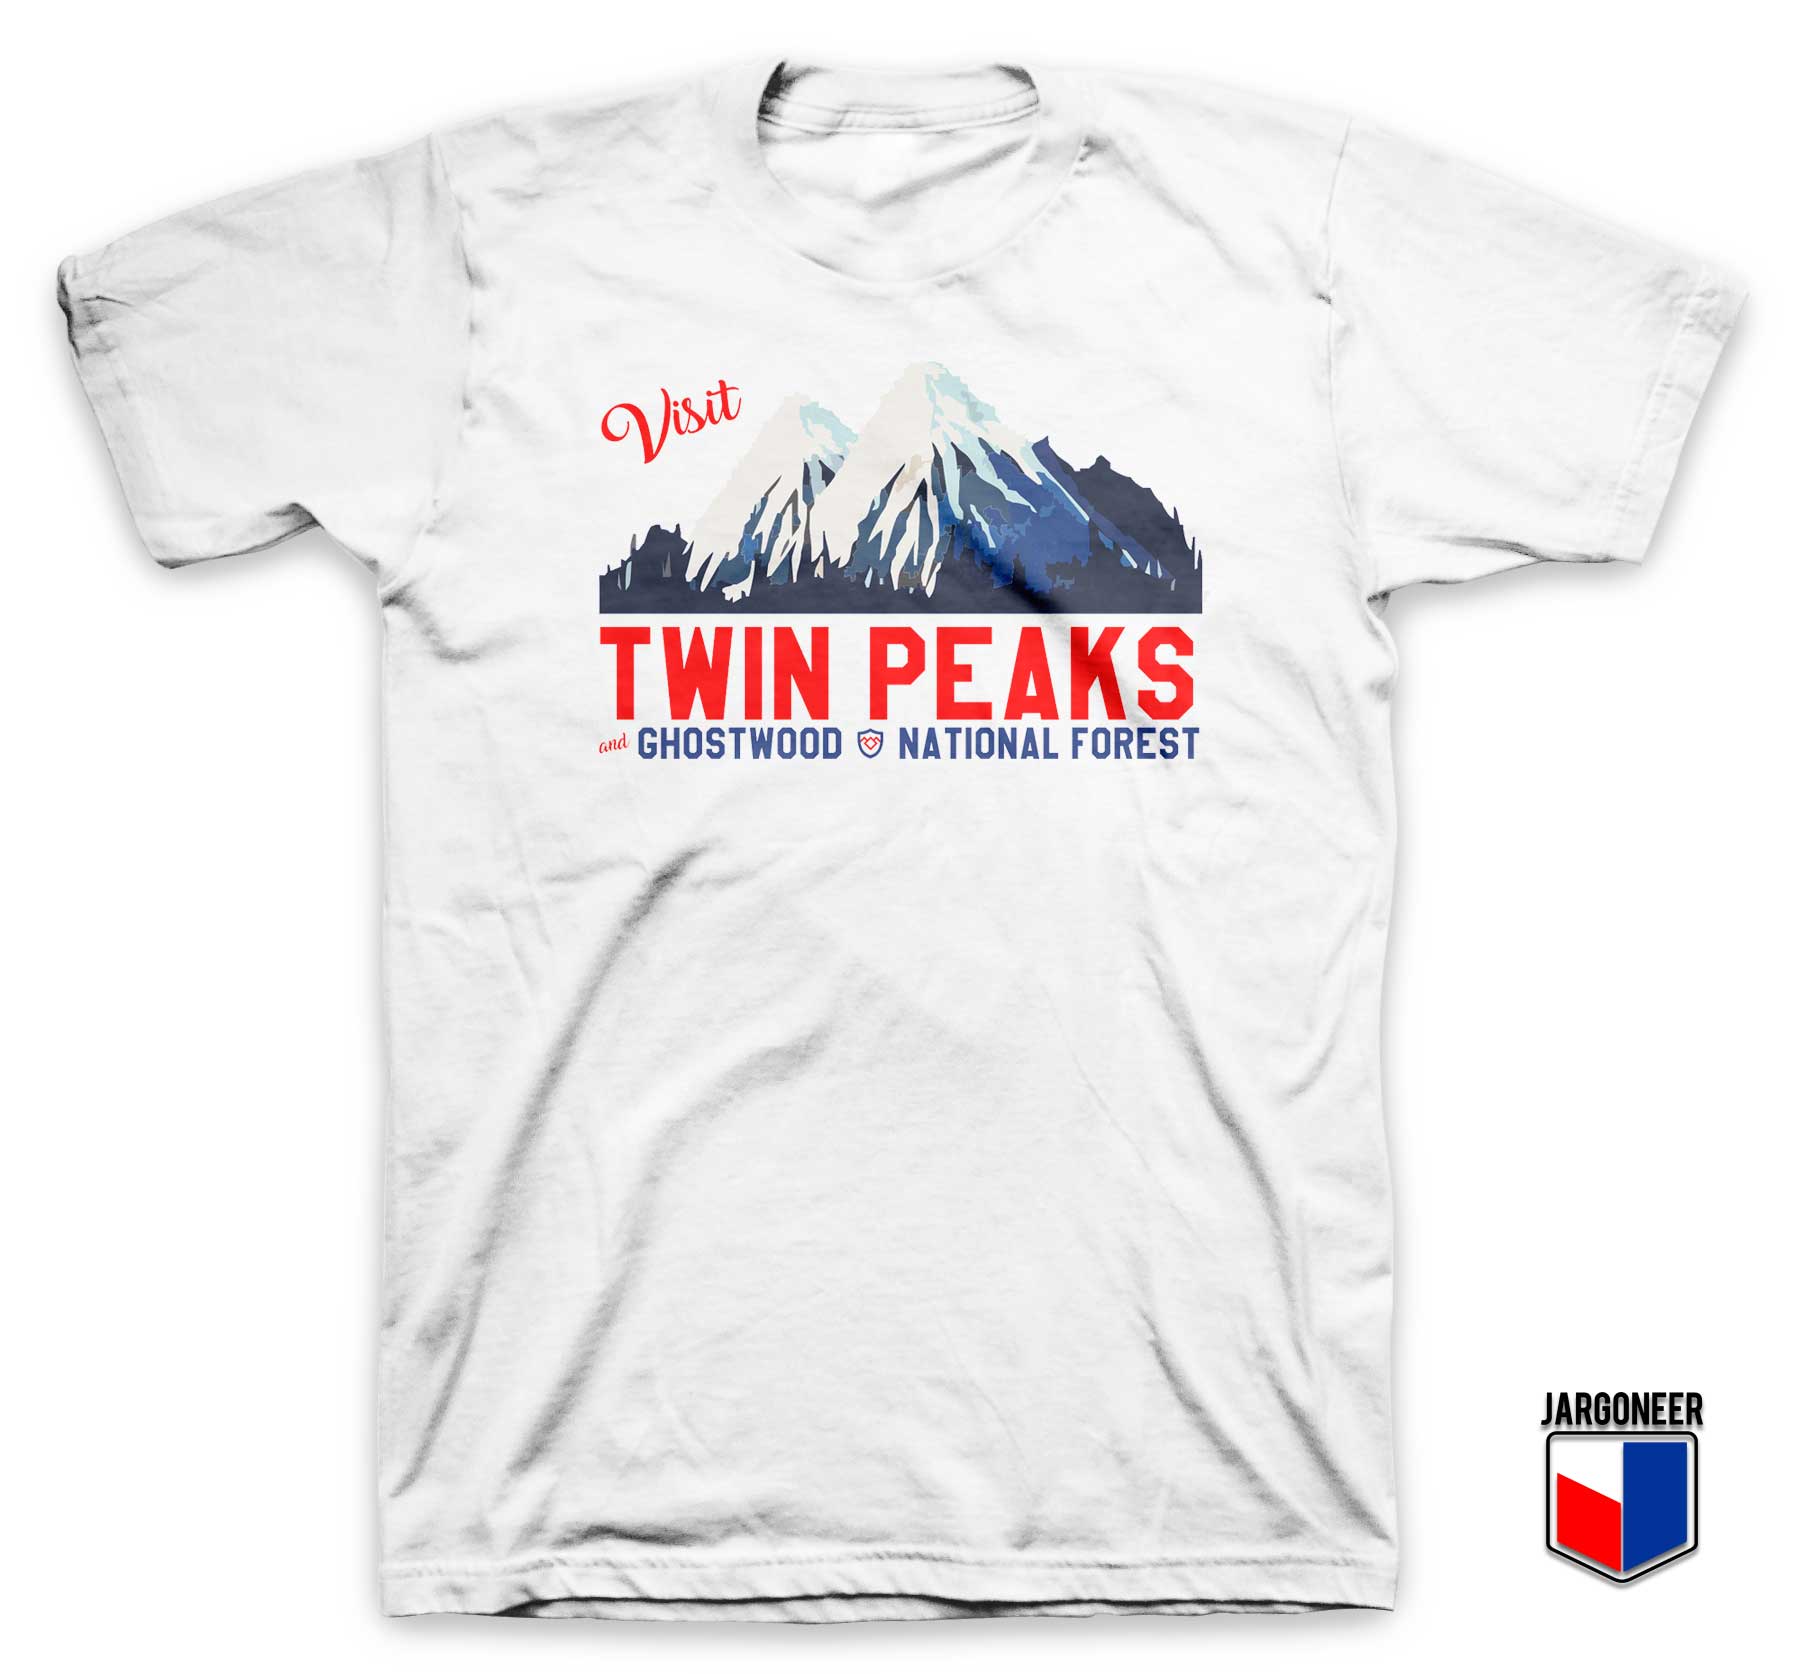 Twin Peaks Ghostwood National Forest T Shirt - Shop Unique Graphic Cool Shirt Designs